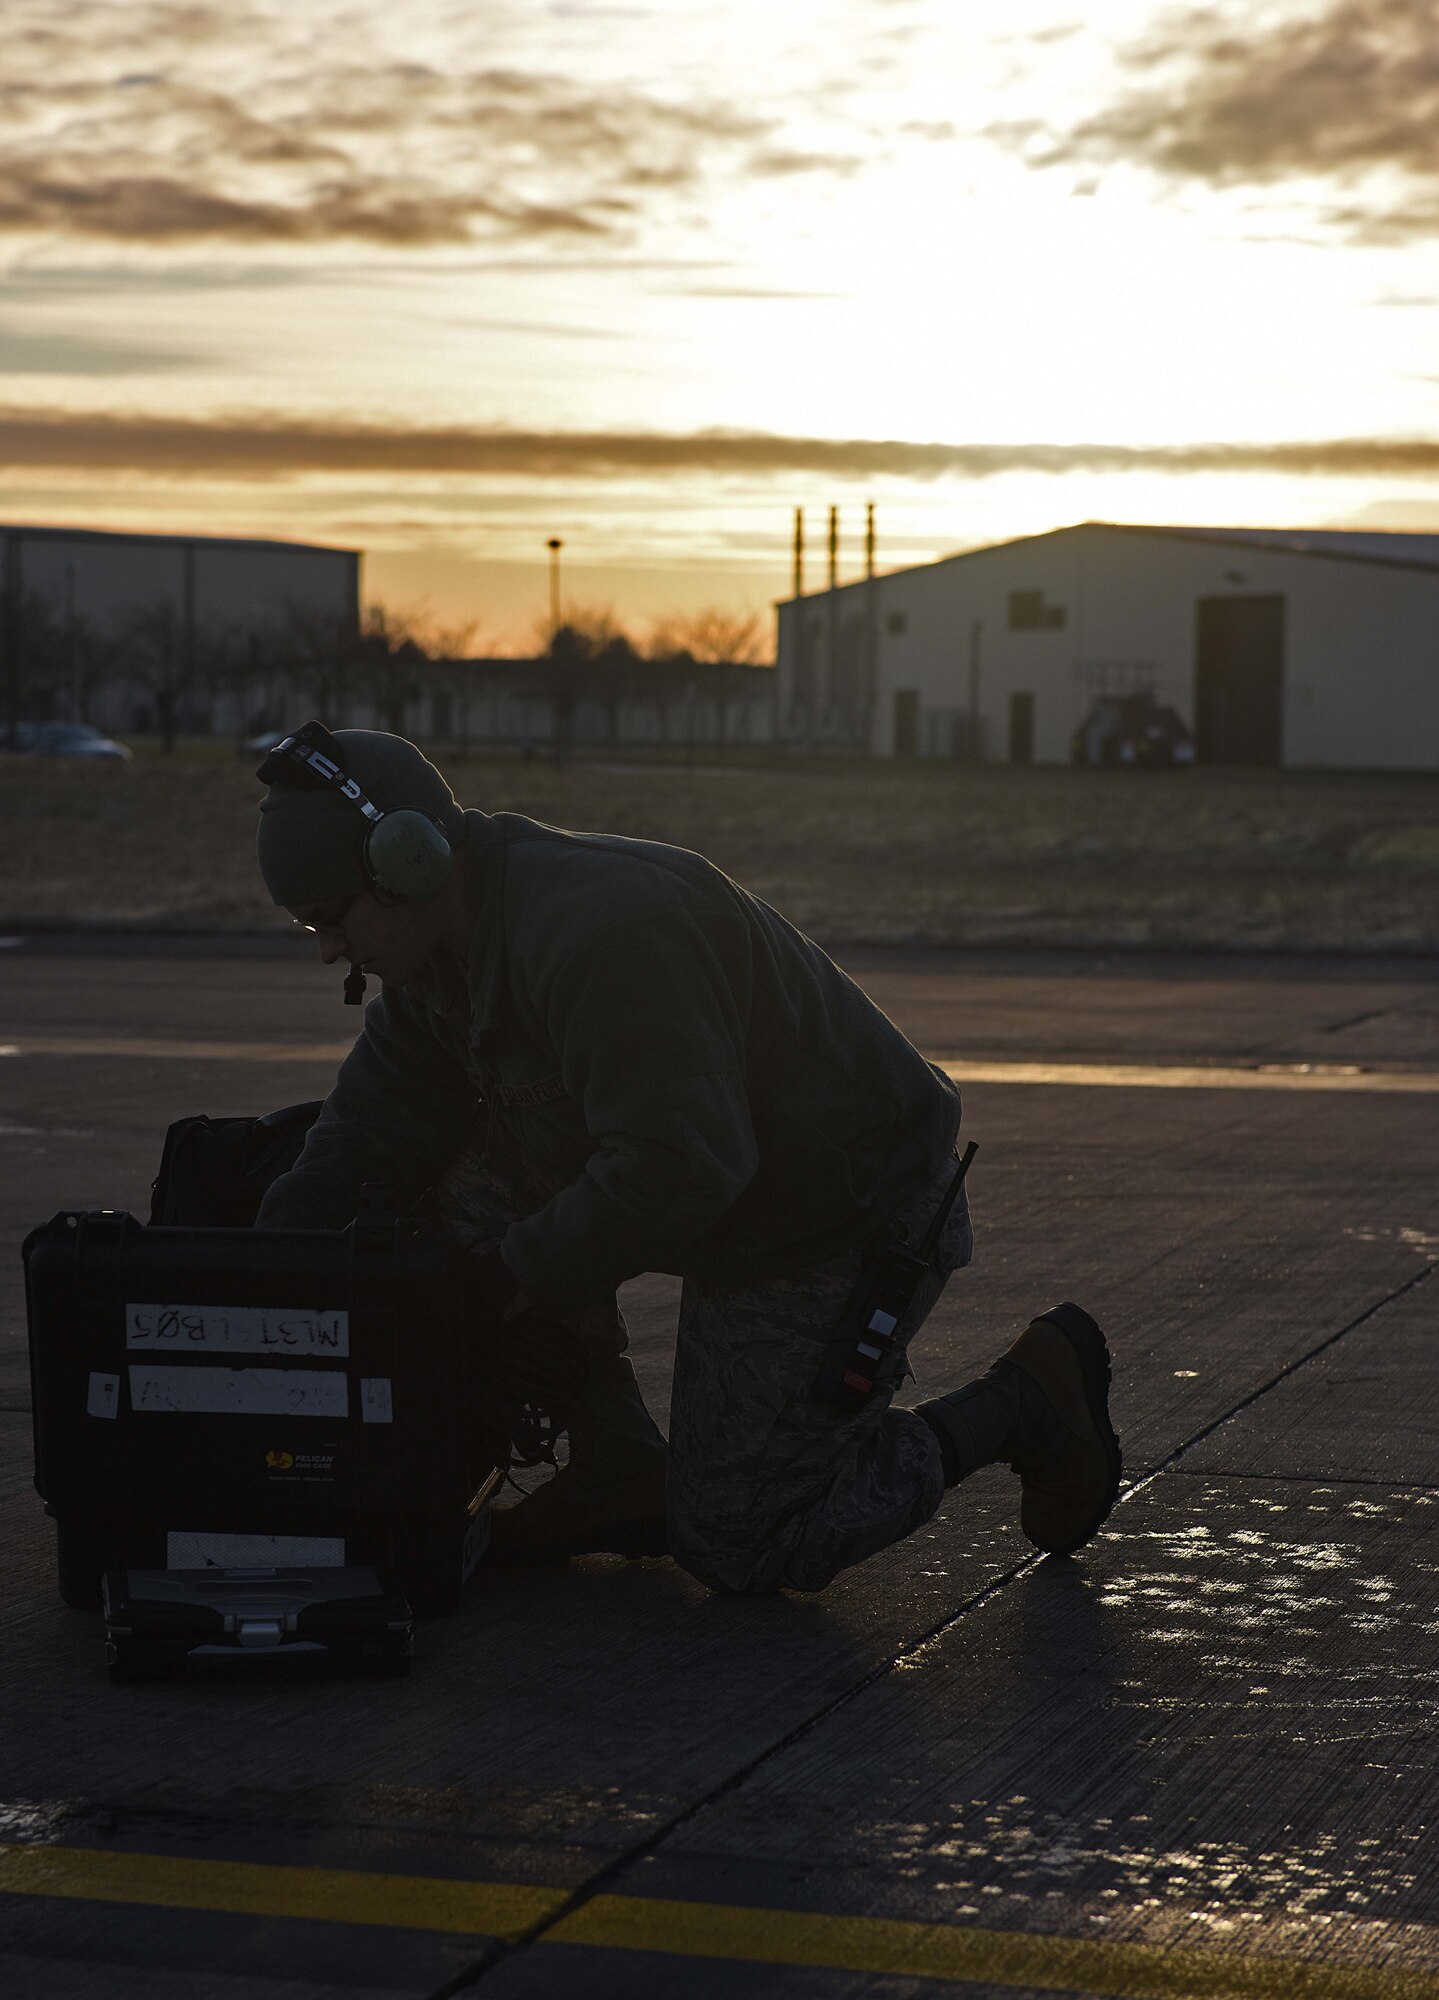 U.S. Air Force Senior Airman Ryan Hortman, 351st Air Refueling Squadron boom operator gives a brief prior to conducting air refueling training with U.S. Air Force F-16C Fighting Falcons, on RAF Milidenhall, England, Feb. 8, 2018. The training was in conjunction with a rotational deployment of U.S. Air Force F-16C Fighting Falcons from the Ohio Air National Guard’s 180th Fighter Wing to Amari Air Base, Estonia, as part of a Theater Security Package. (U.S. Air Force photo by Airman 1st Class Luke Milano)